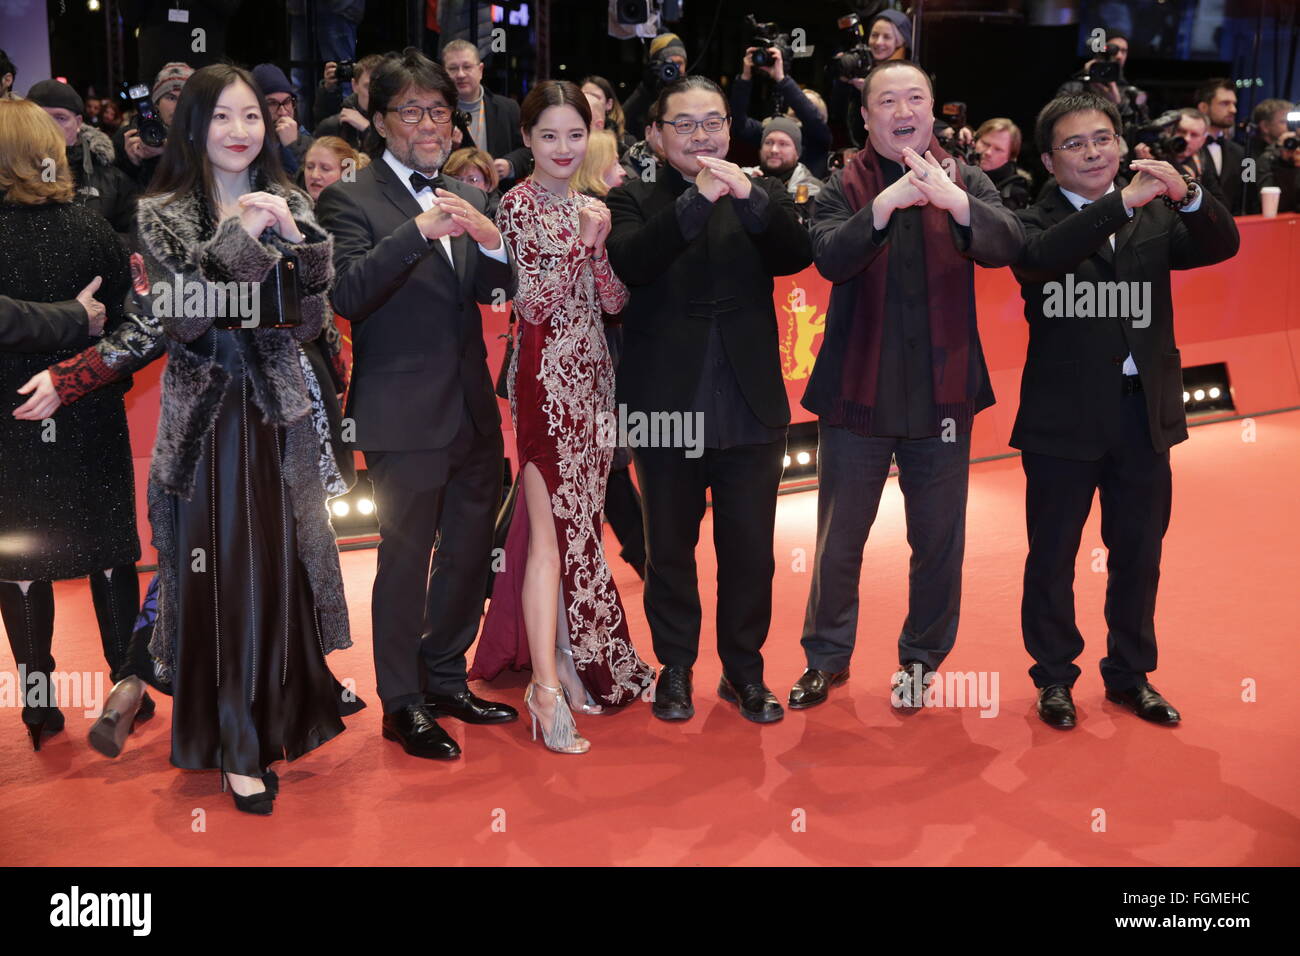 Berlin, Germany. 20th Feb, 2016. 66th International Film Festival in Berlin, Germany, 20 February 2016. Closing and award ceremony: Members of the cast of 'Chang Jiang Tu' with cinematographer Mark Lee Ping-Bing (2nd l), Xin Zhi Lei (3rd l), director Yang Chao, producer Wang Yu and non-identified person (r). The Berlinale runs from 11 February to 21 February 2016. Photo: JENS KALAENE/dpa/Alamy Live News Stock Photo